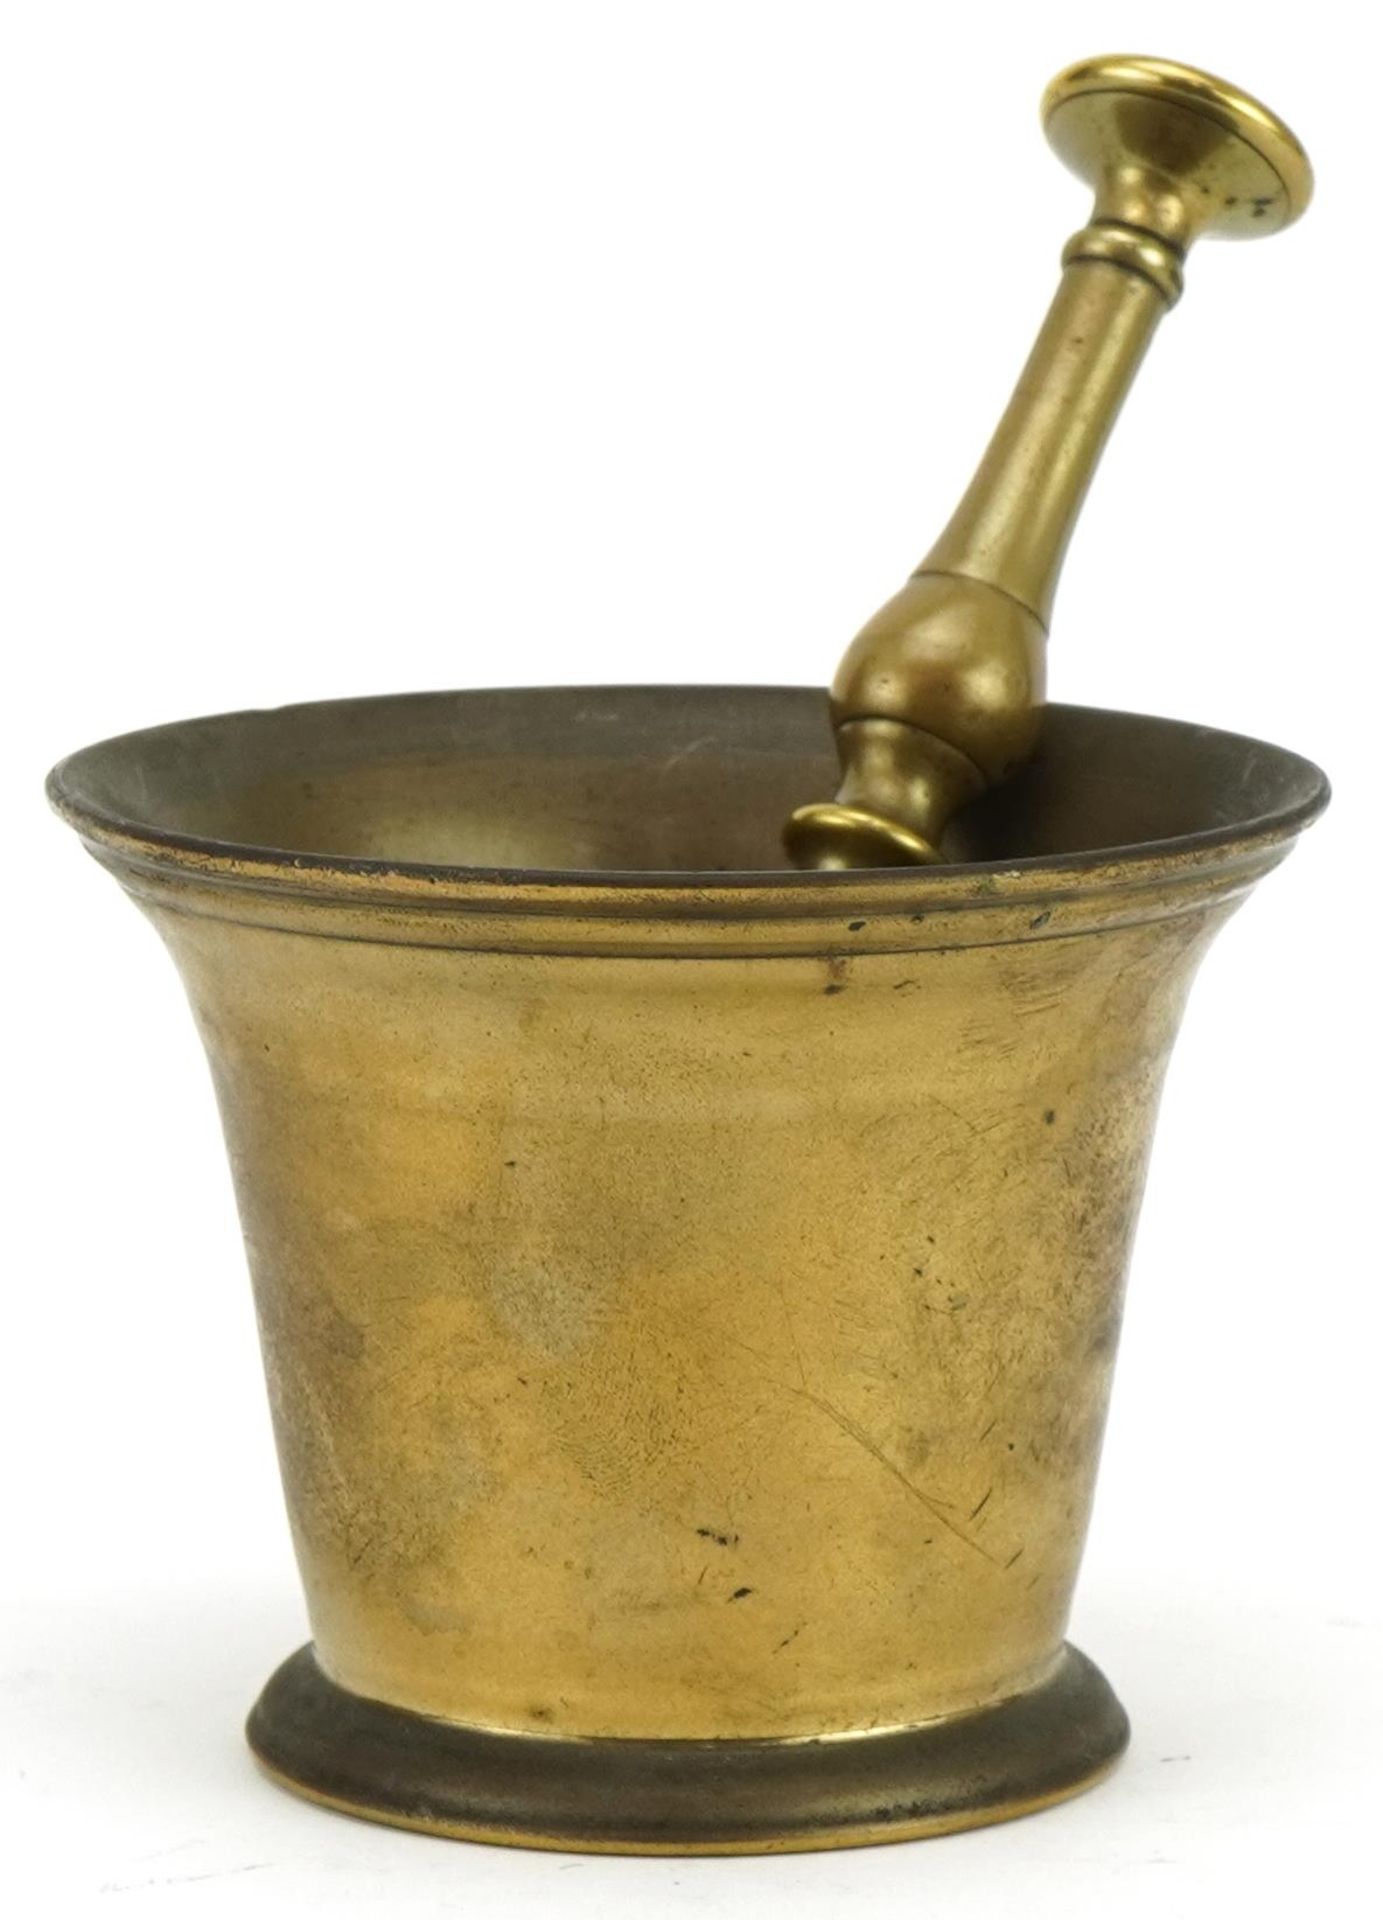 Antique bronze pestle and mortar, the pestle 17cm in length : For further information on this lot